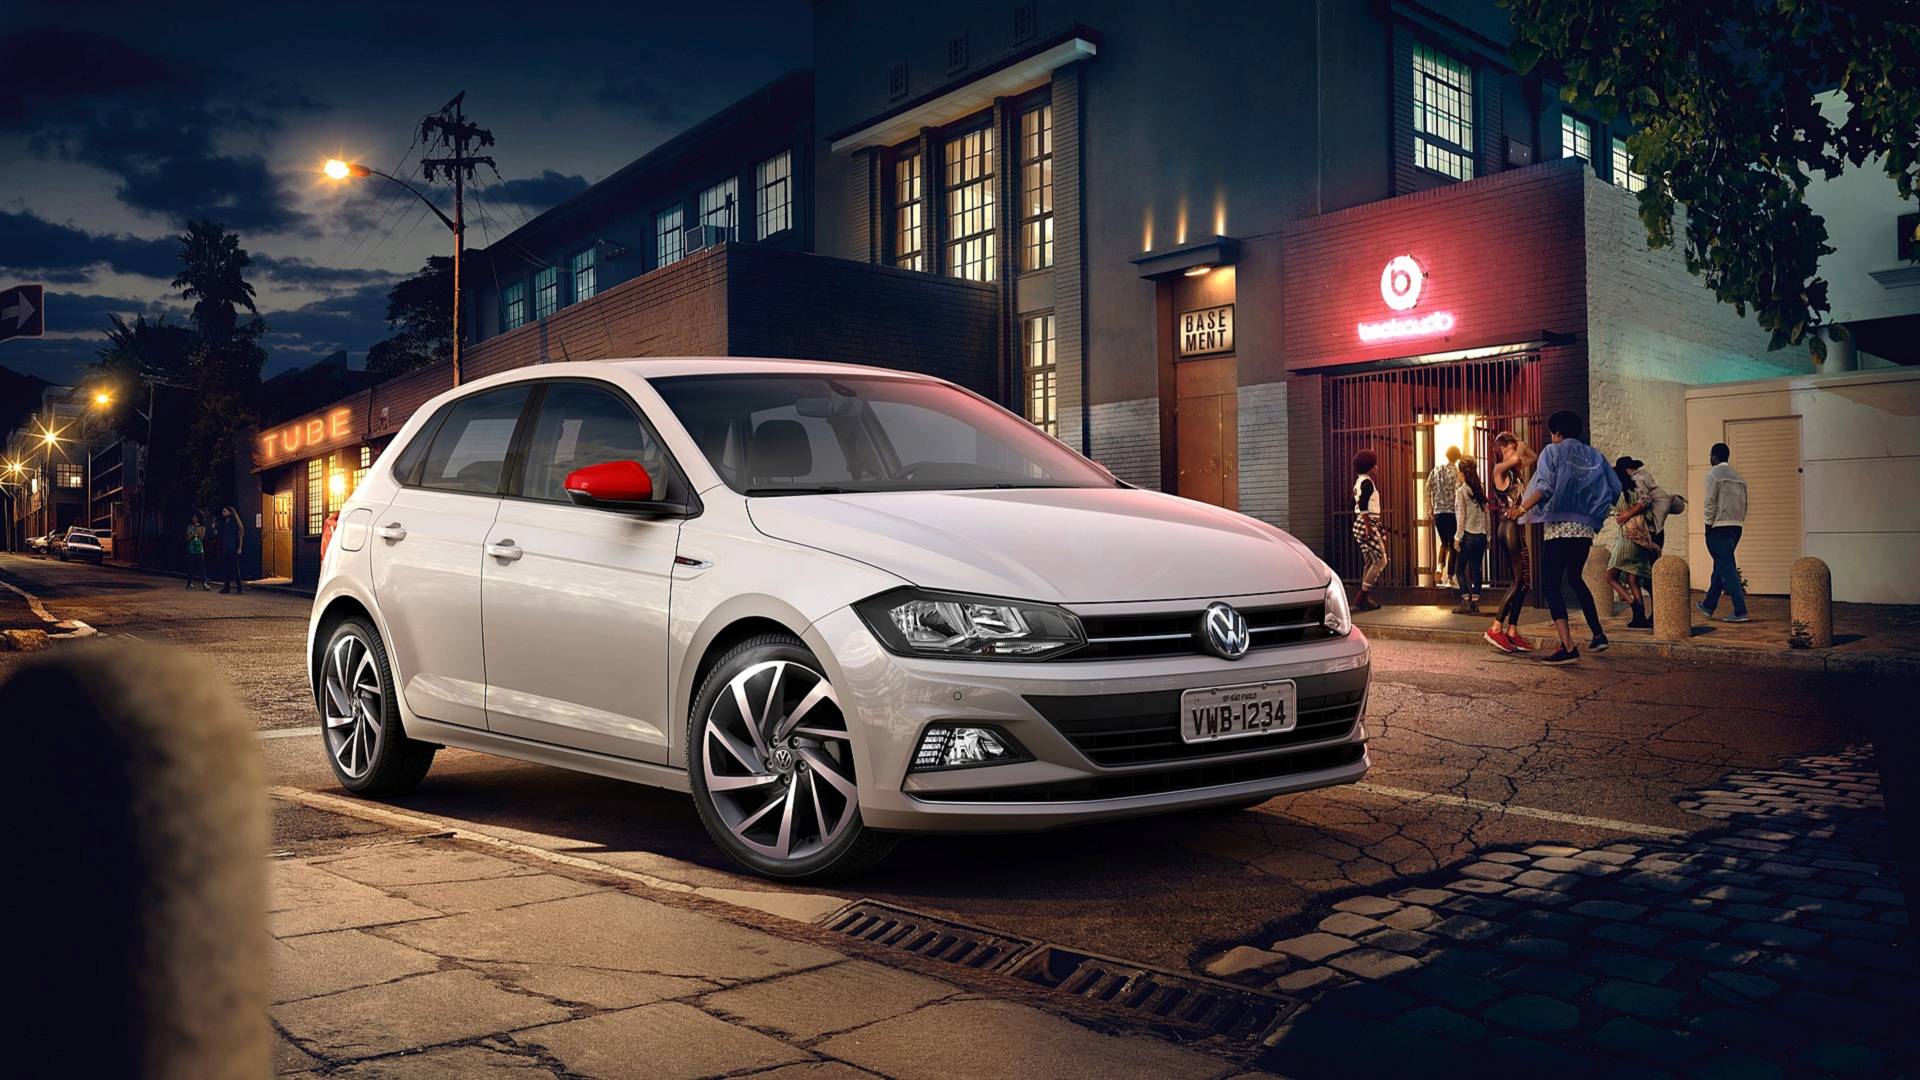 VW Polo &amp; VW Virtus (Polo sedan) Beats Edition launched in